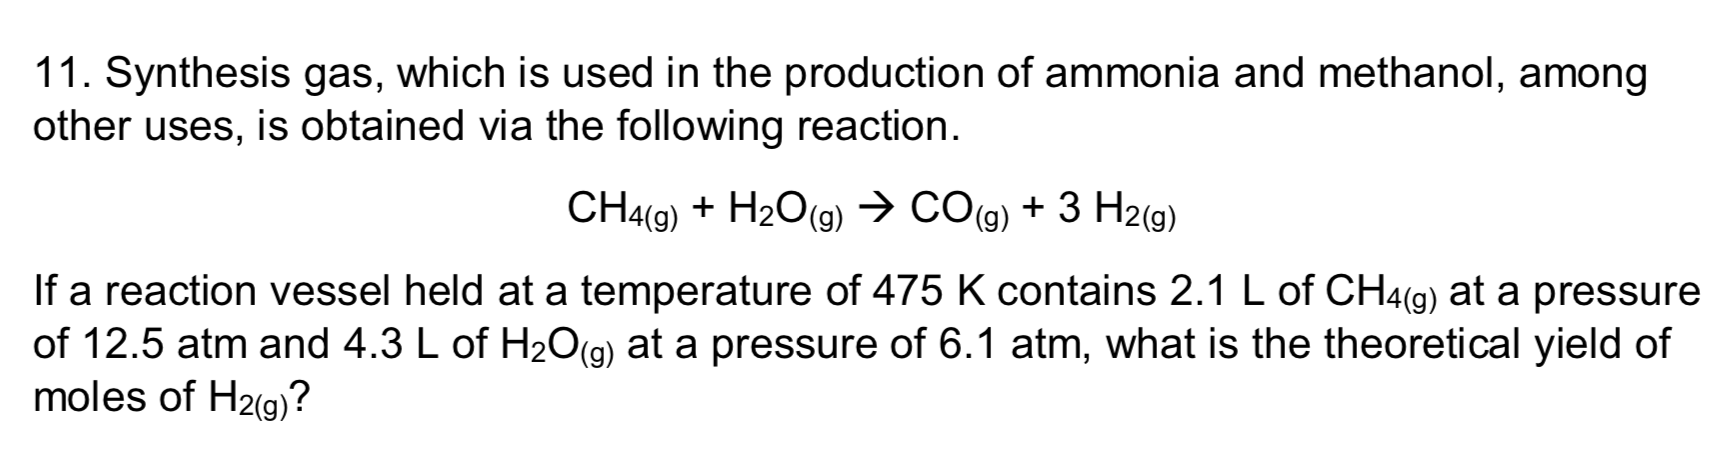 11. Synthesis gas, which is used in the production of ammonia and methanol, among
other uses, is obtained via the following reaction.
CH4(9) + H2O(g) → CO(g) + 3 H2(g)
If a reaction vessel held at a temperature of 475 K contains 2.1 L of CH4(g) at a pressure
of 12.5 atm and 4.3 L of H2O(g) at a pressure of 6.1 atm, what is the theoretical yield of
moles of H2(g)?
